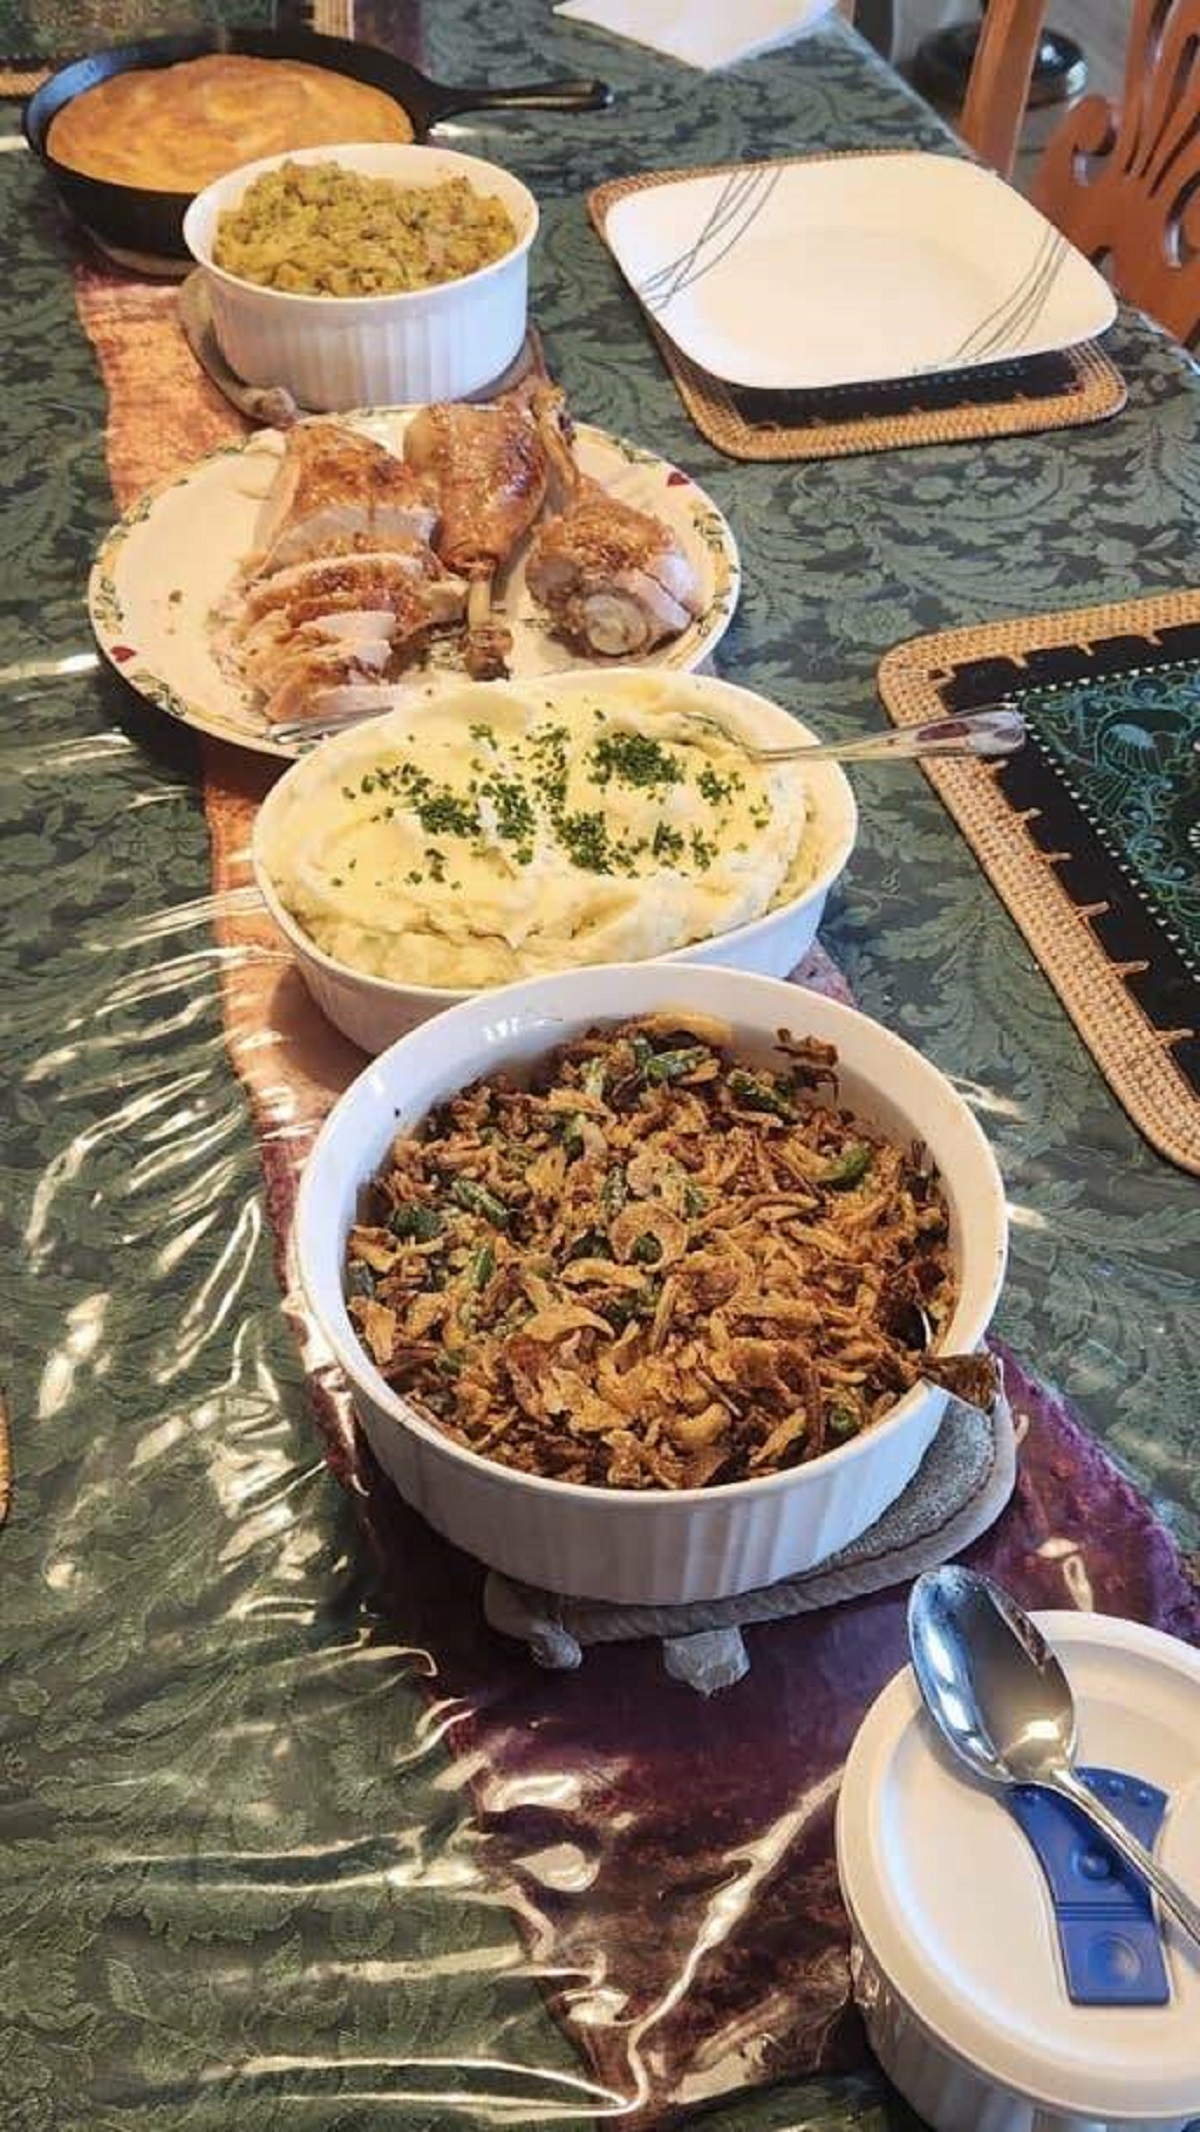 "I cooked a Thanksgiving meal from scratch for my family, and no one ate it."